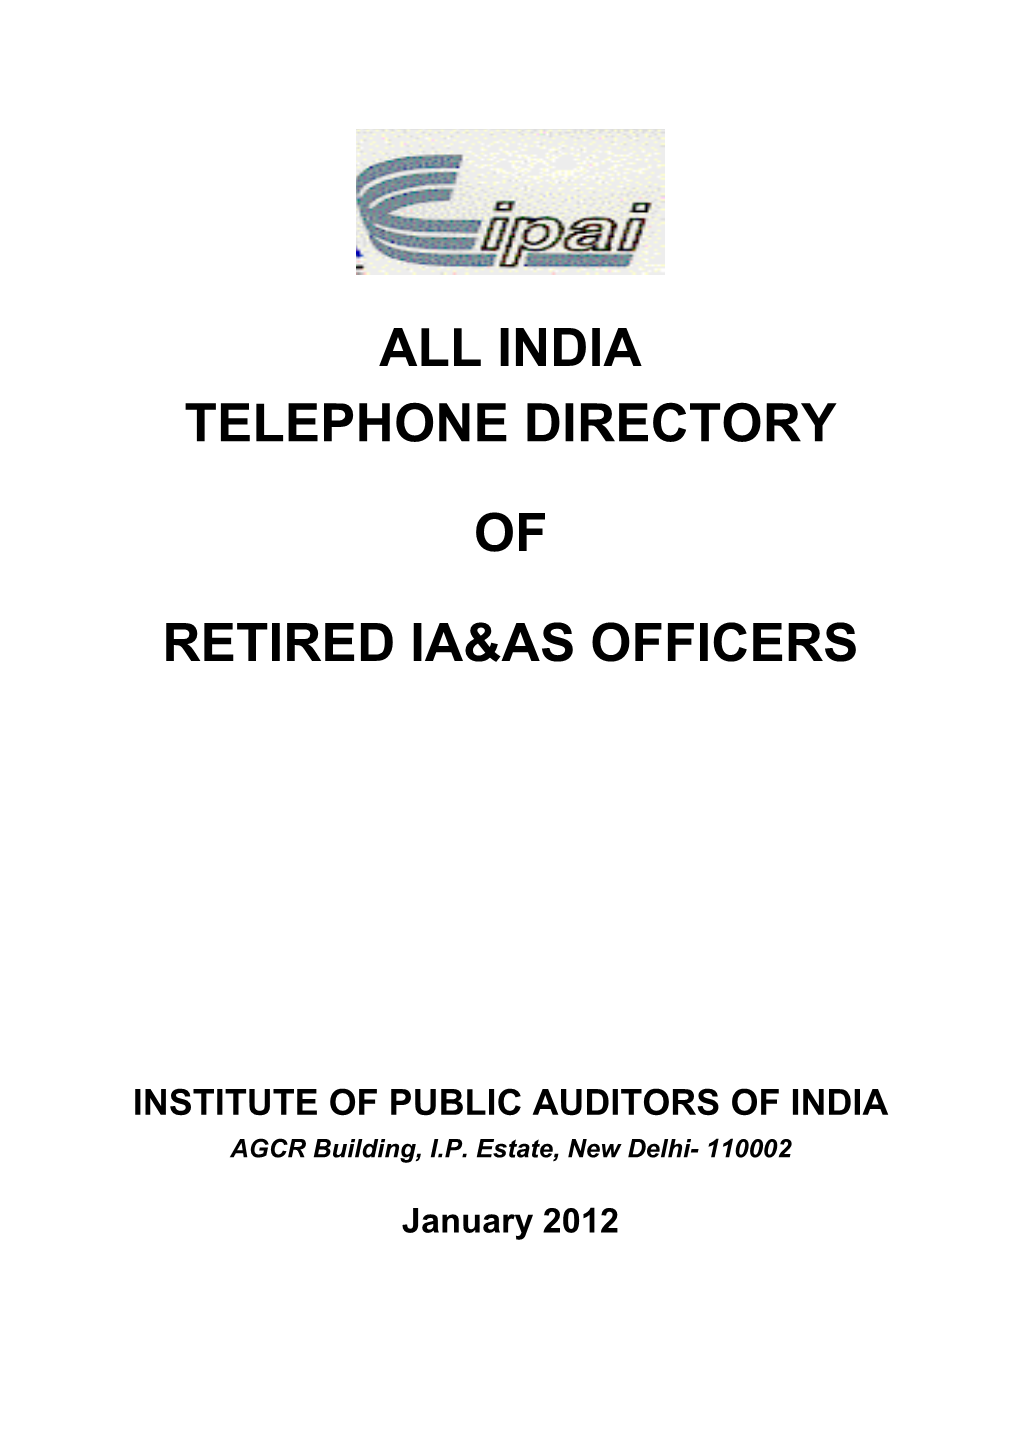 All India Telephone Directory of Retired Ia&As Officers